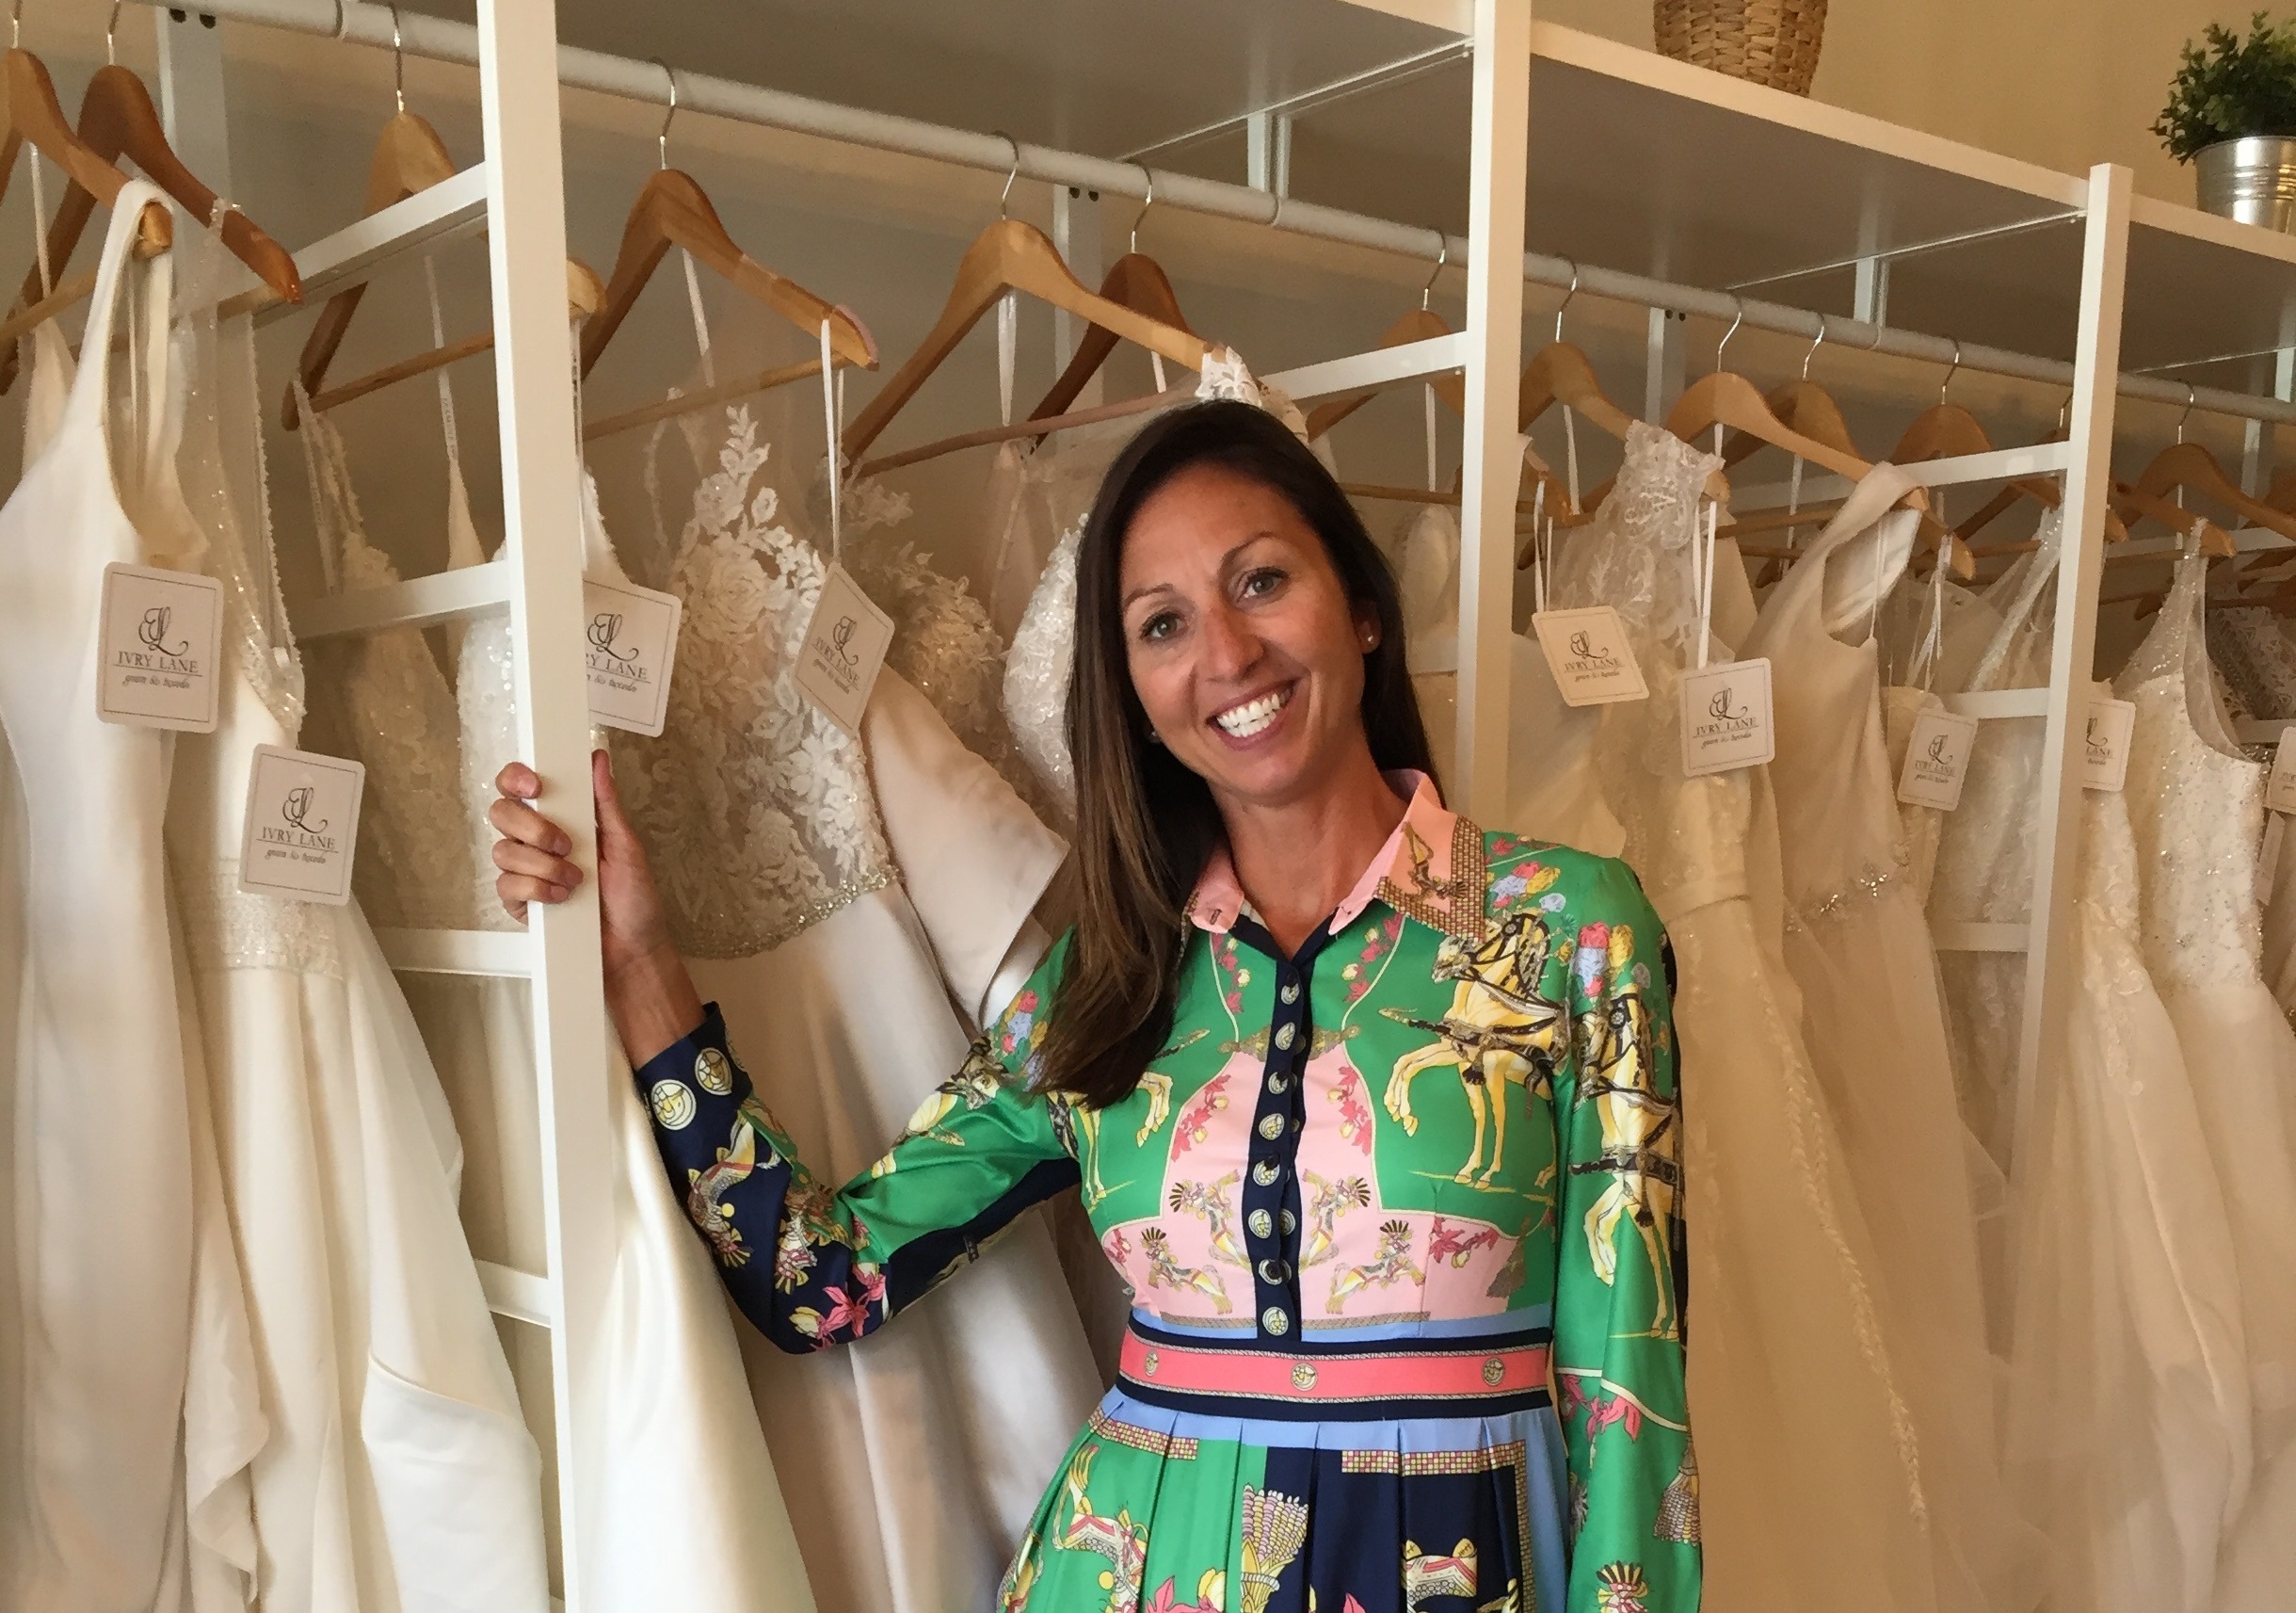 Ivry Lane wedding gown and tuxedo shop opens in Brownsburg